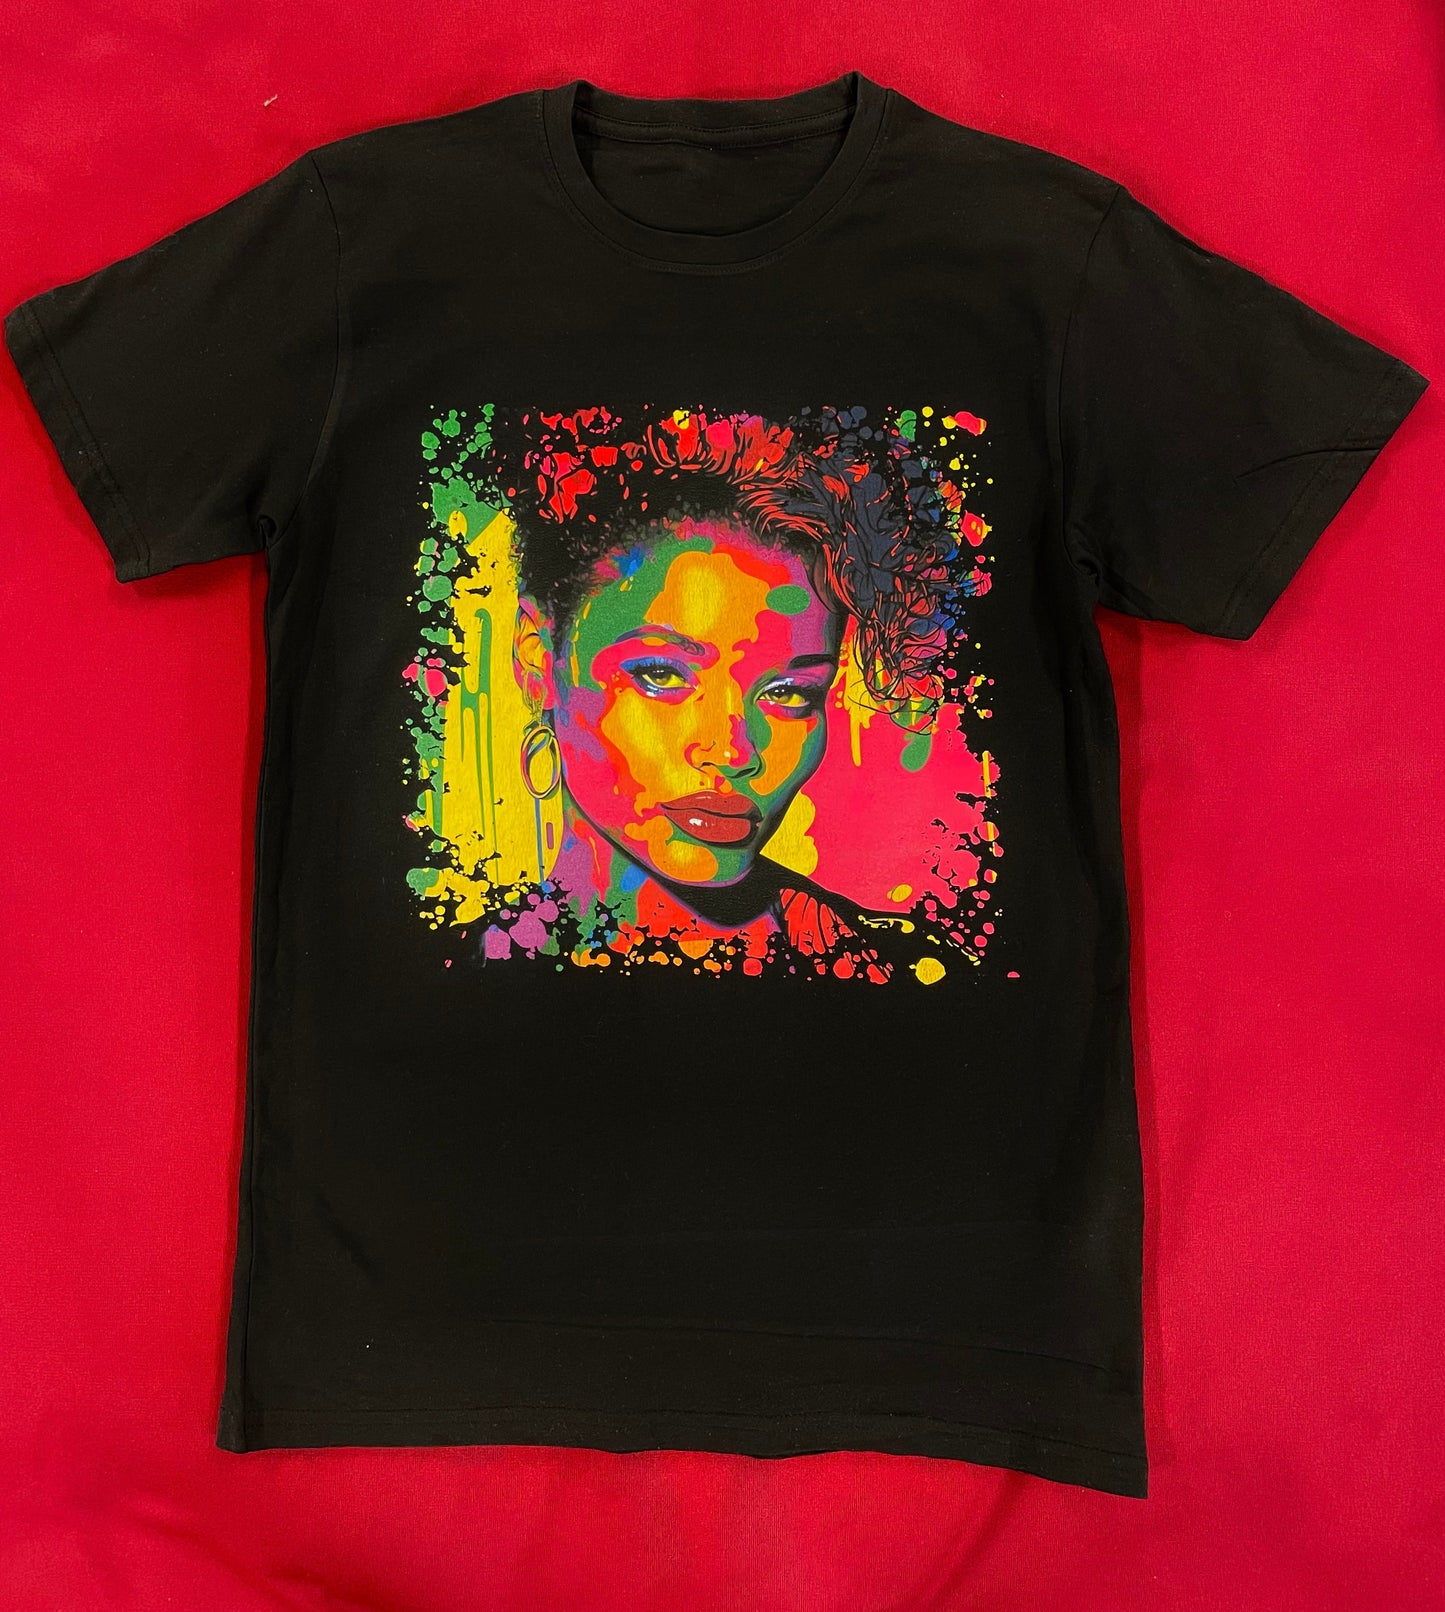 Unisex cotton t-shirt with 90s-inspired pop art print in bold colors and graphic shapes. The shirt features short sleeves and a crew neck, and is shown on a model in a casual, laid-back setting.